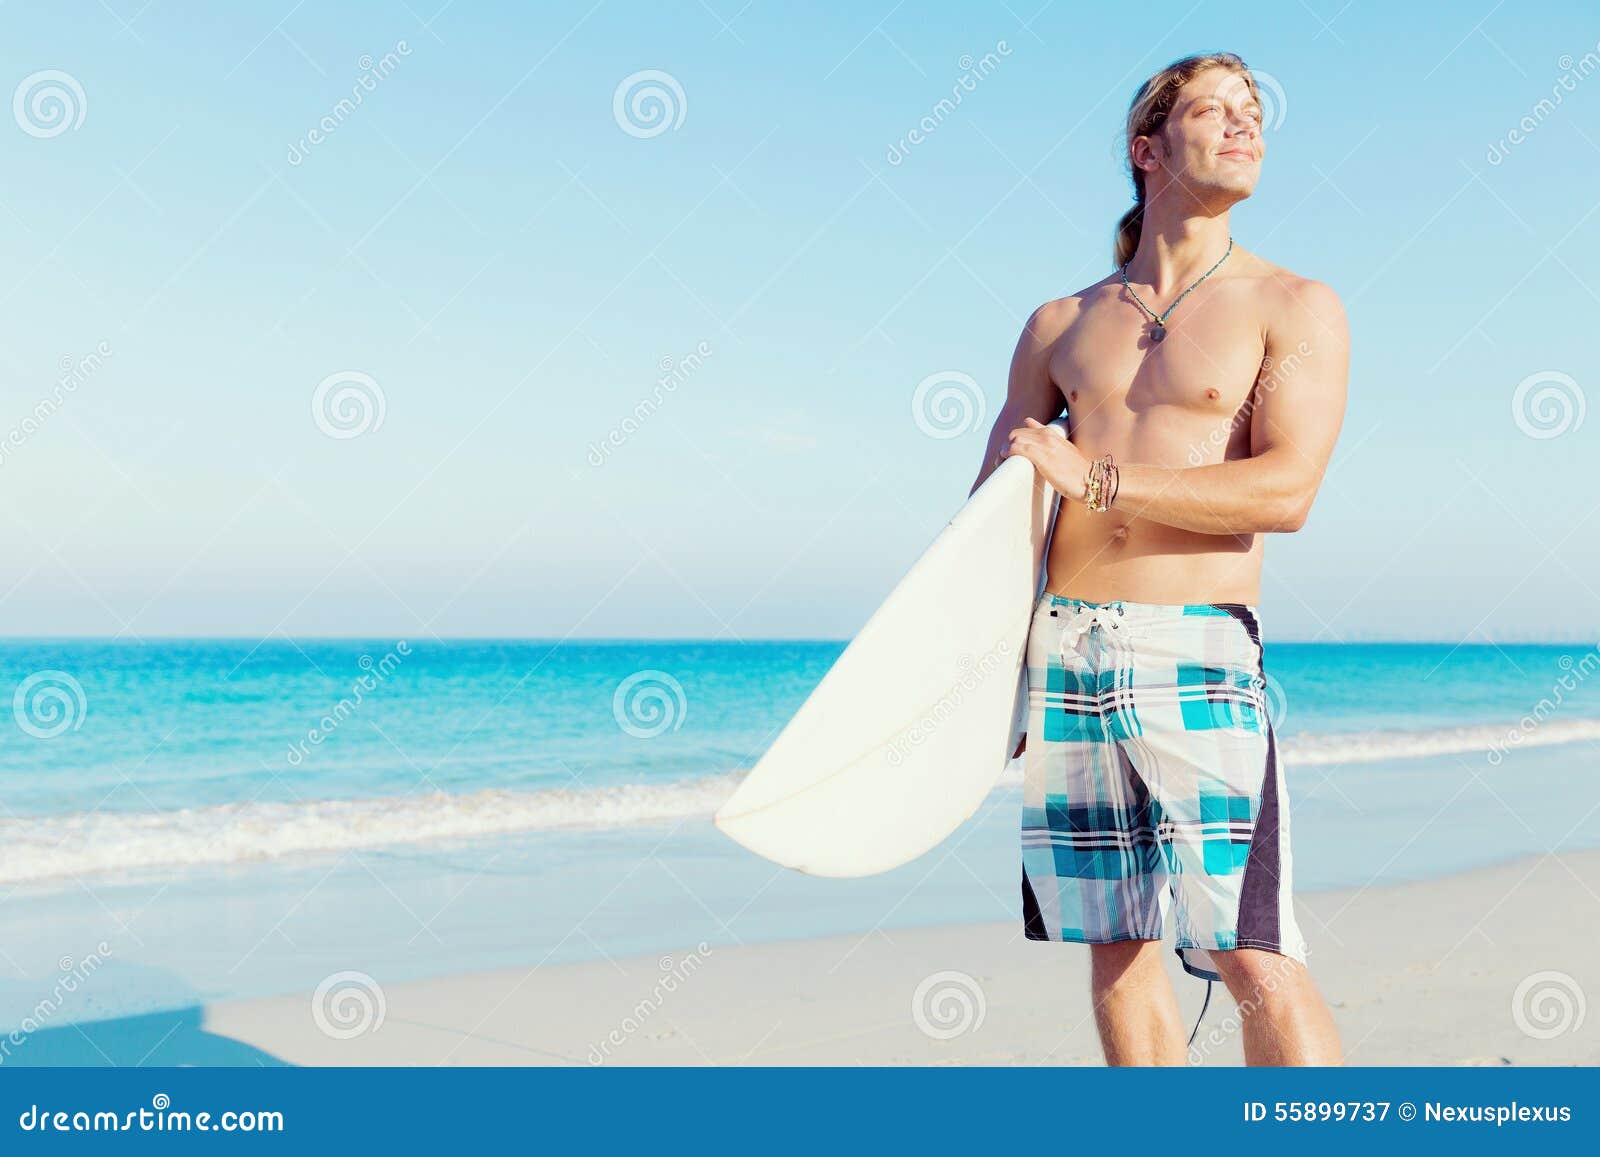 Ready to hit waves stock image. Image of active, recreation - 55899737